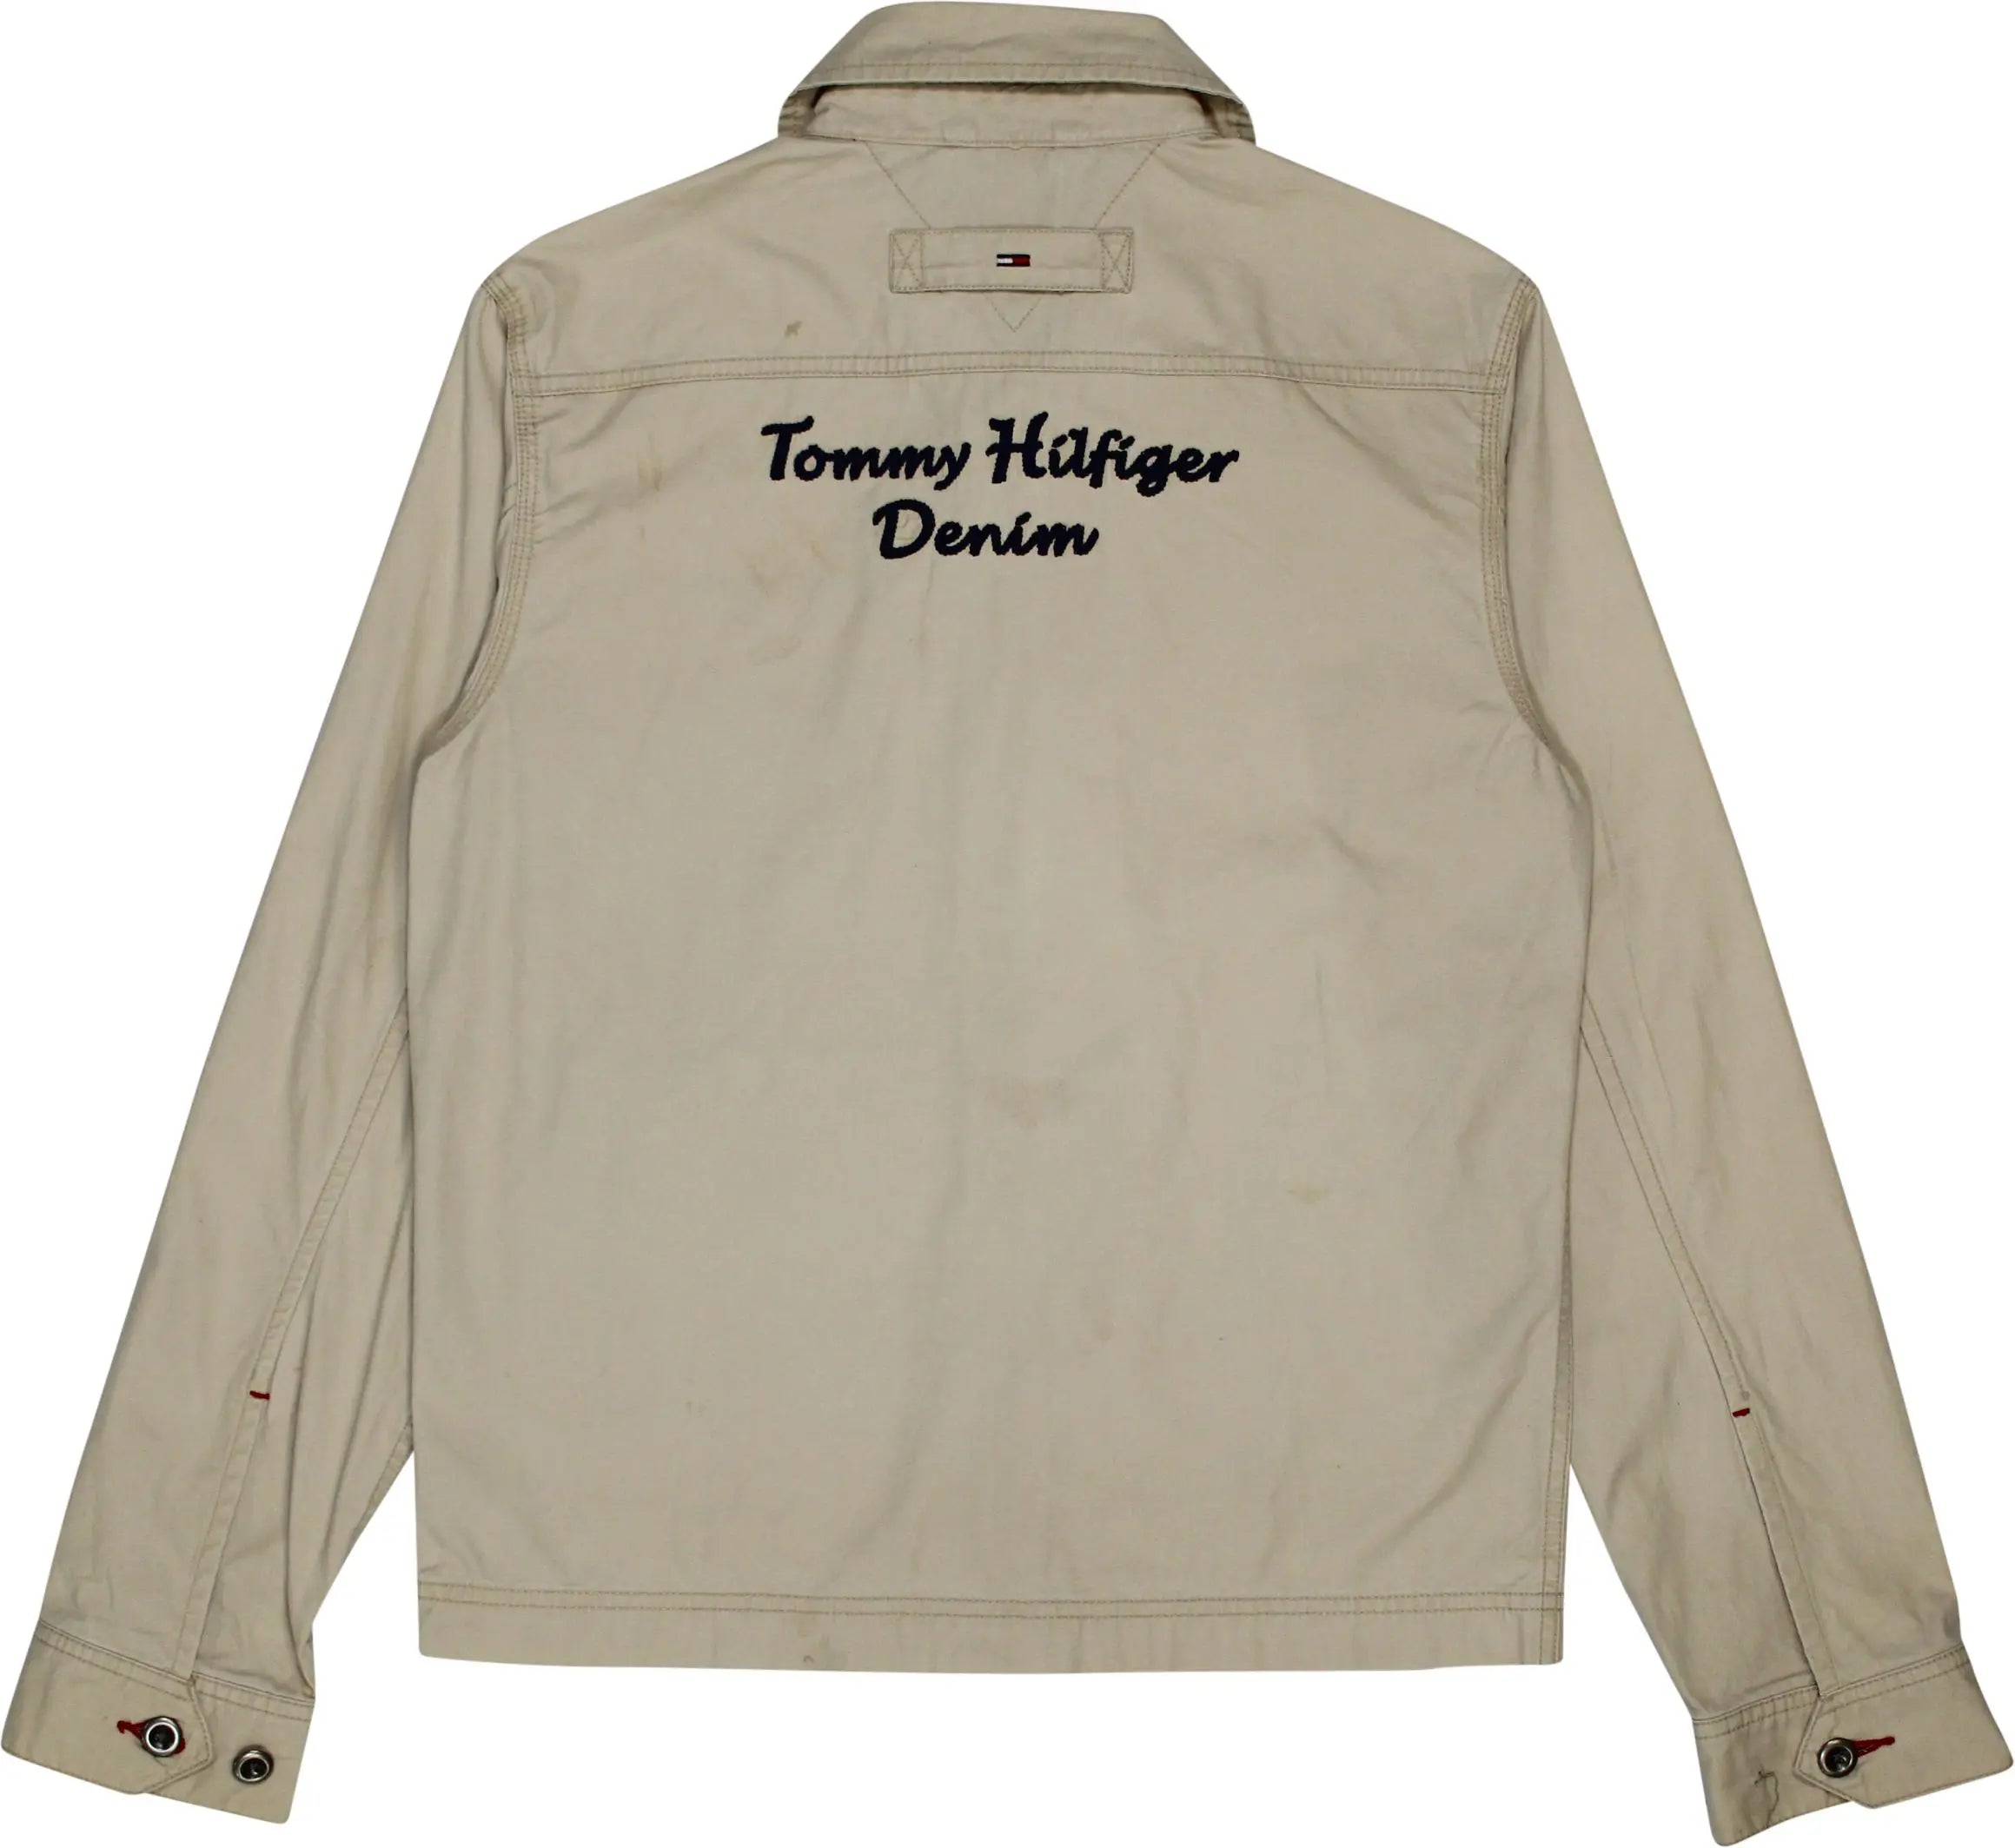 Tommy Hilfiger - Cotton Jacket by Tommy Hilfiger- ThriftTale.com - Vintage and second handclothing